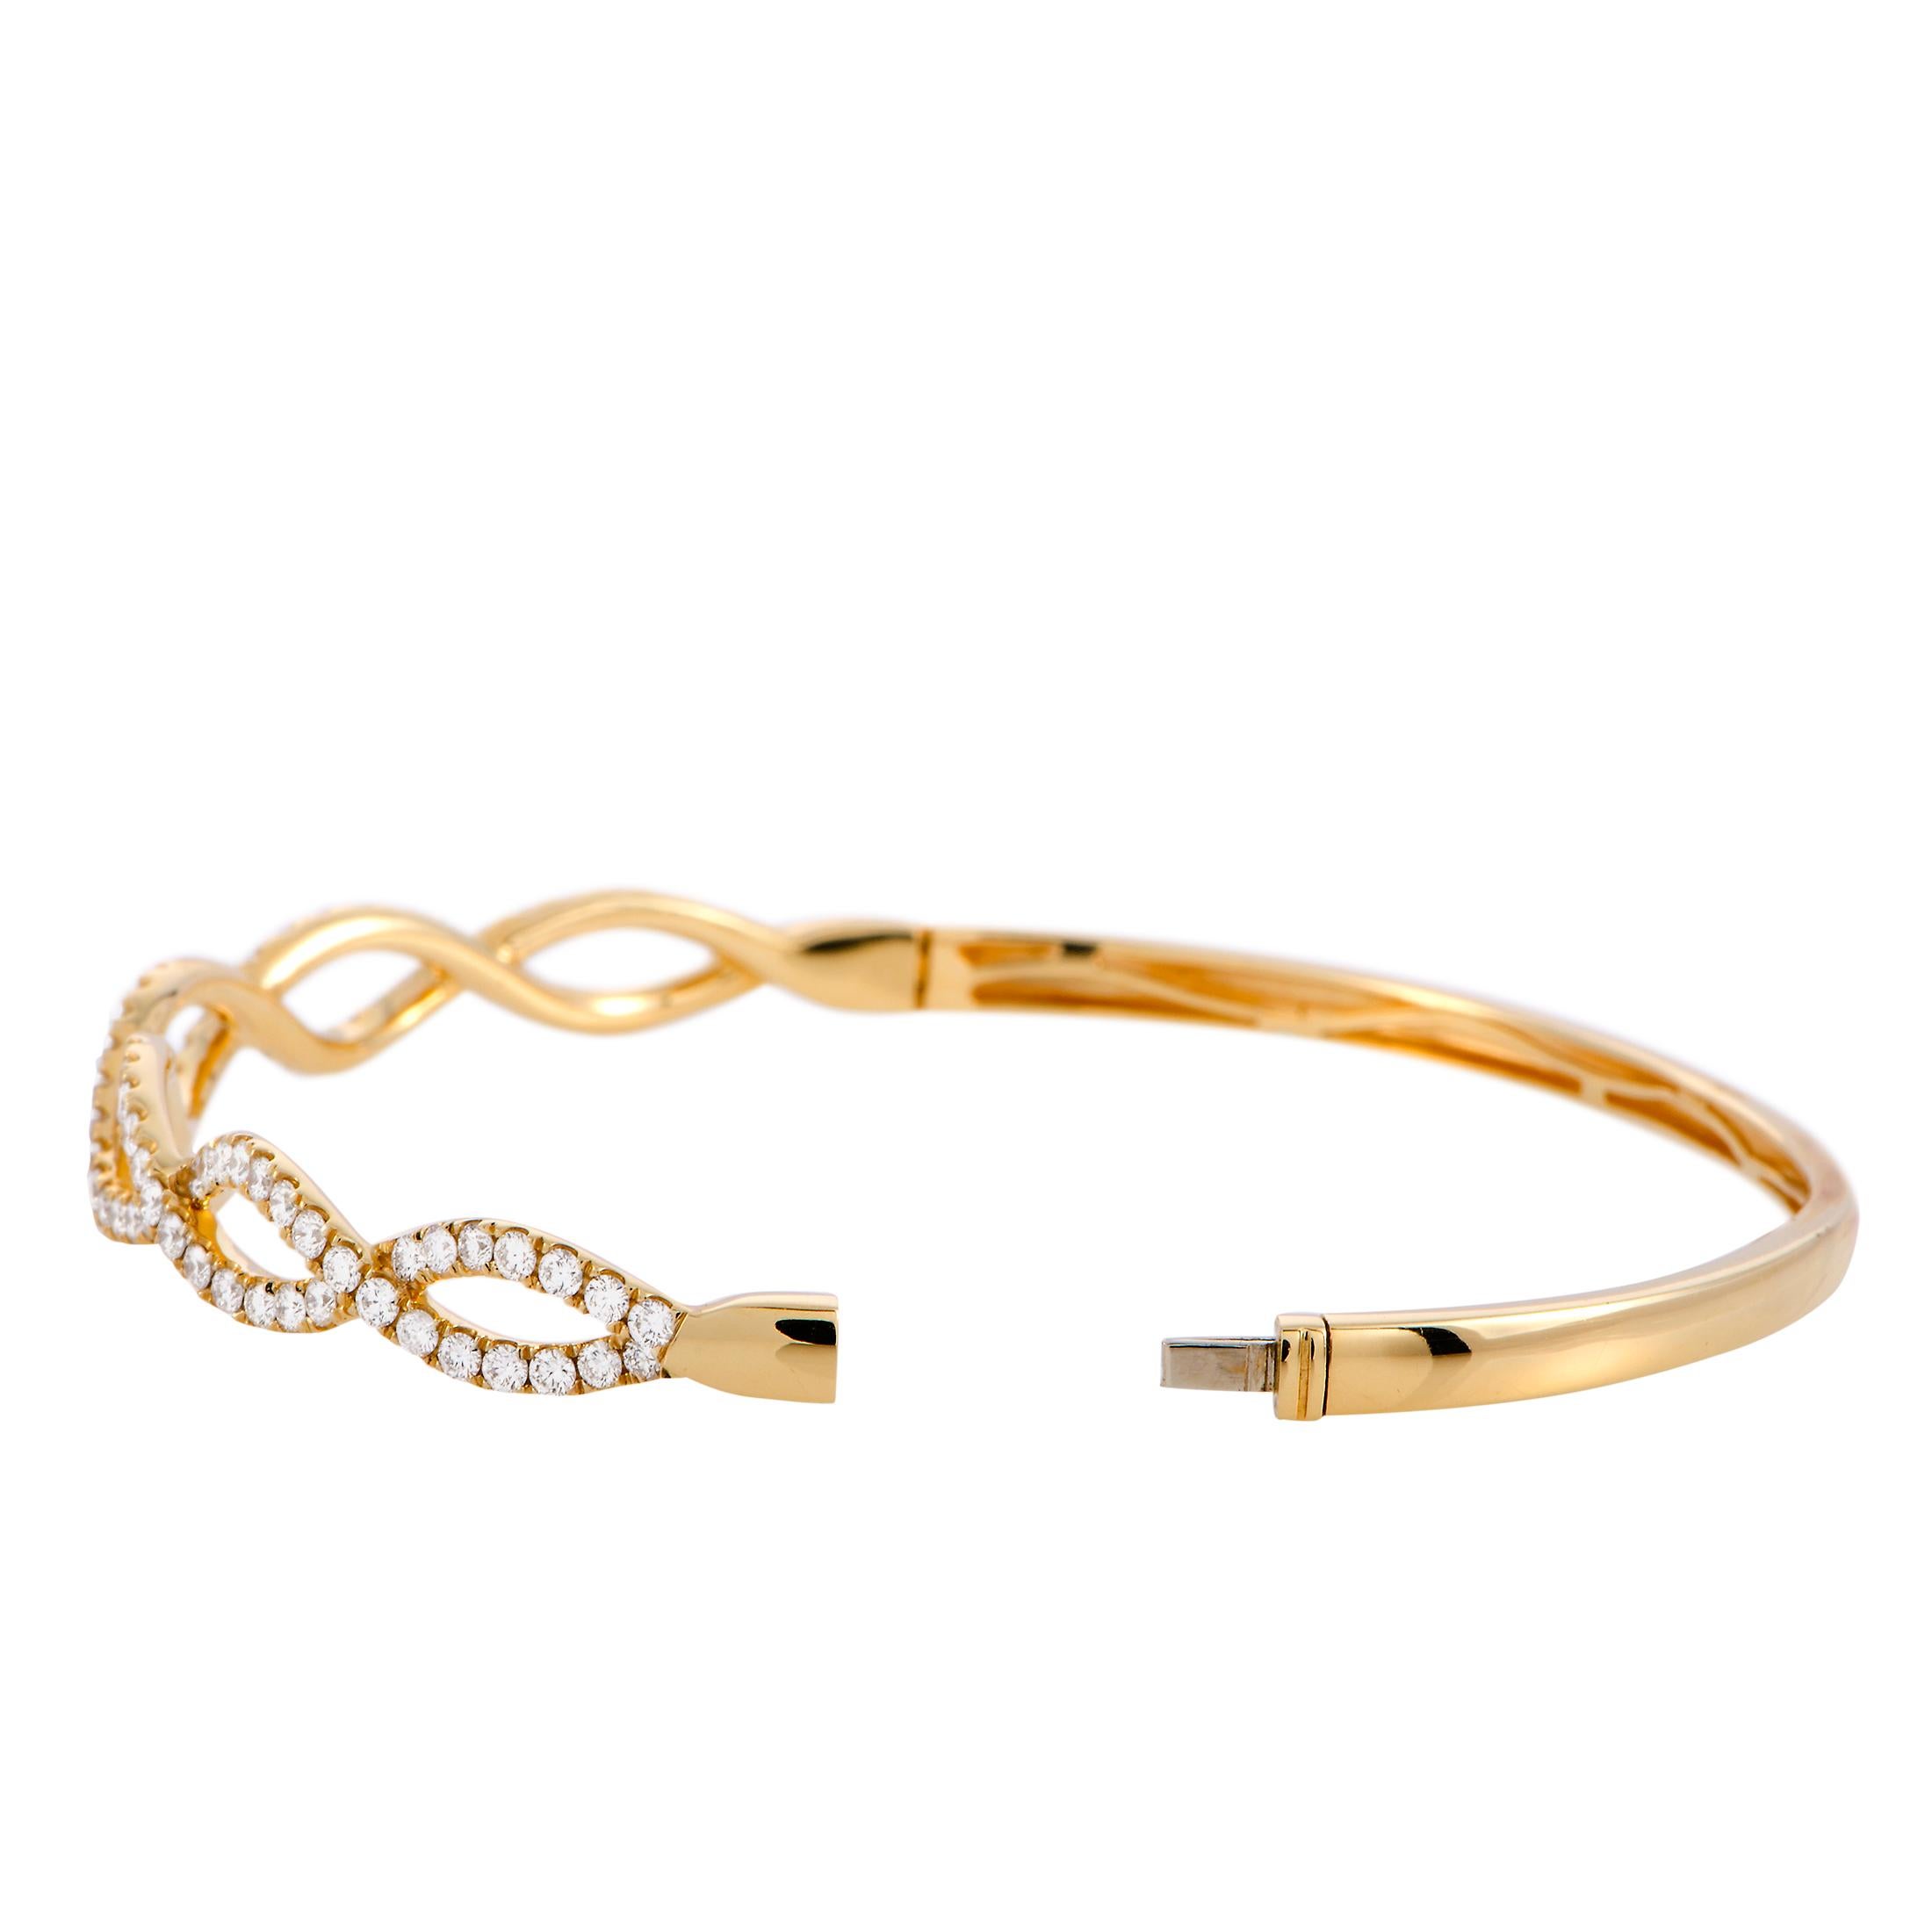 This LB Exclusive bangle bracelet is crafted from 18K yellow gold and weighs 11.4 grams, measuring 7.85” in length with a 2.50” diameter. The bracelet is set with diamond stones that amount to 1.66 carats.

Offered in brand new condition, this item